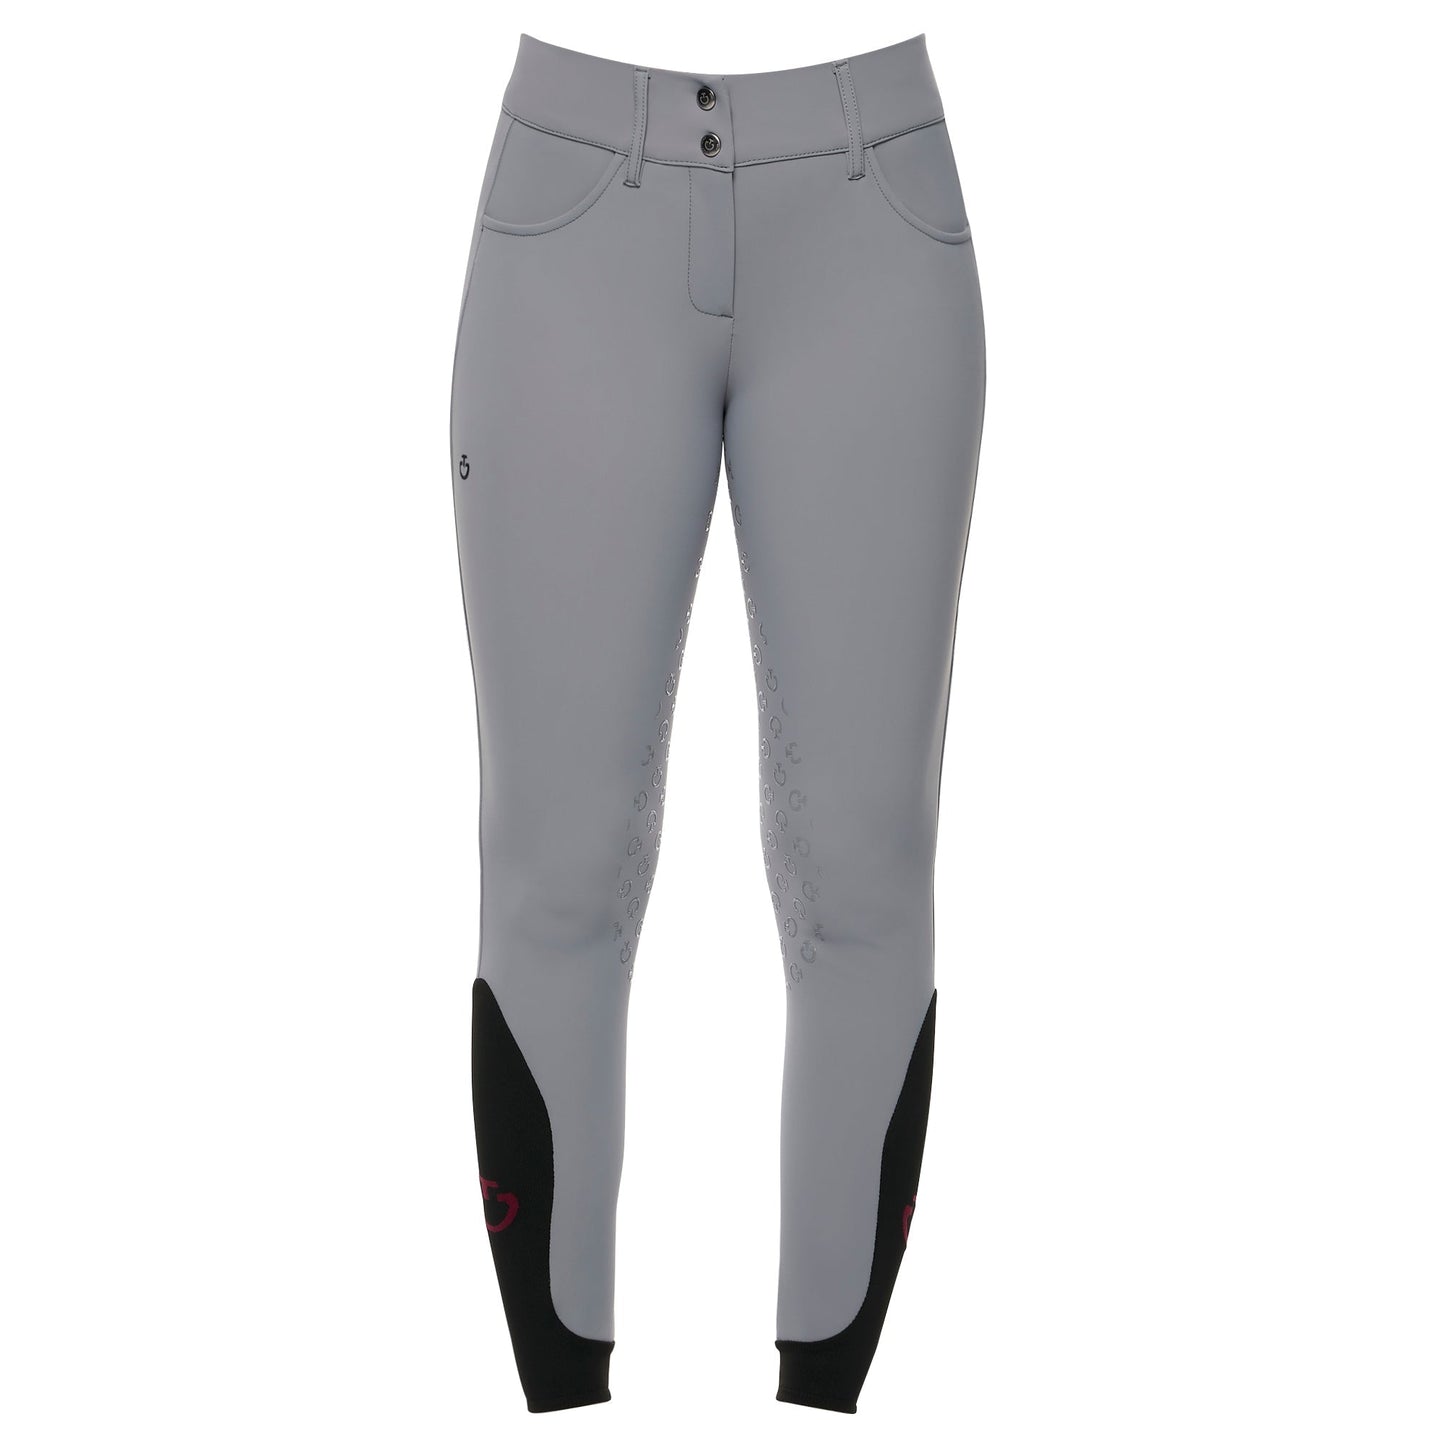 Cavalleria Toscana American Full Grip Breeches-Trailrace Equestrian Outfitters-The Equestrian